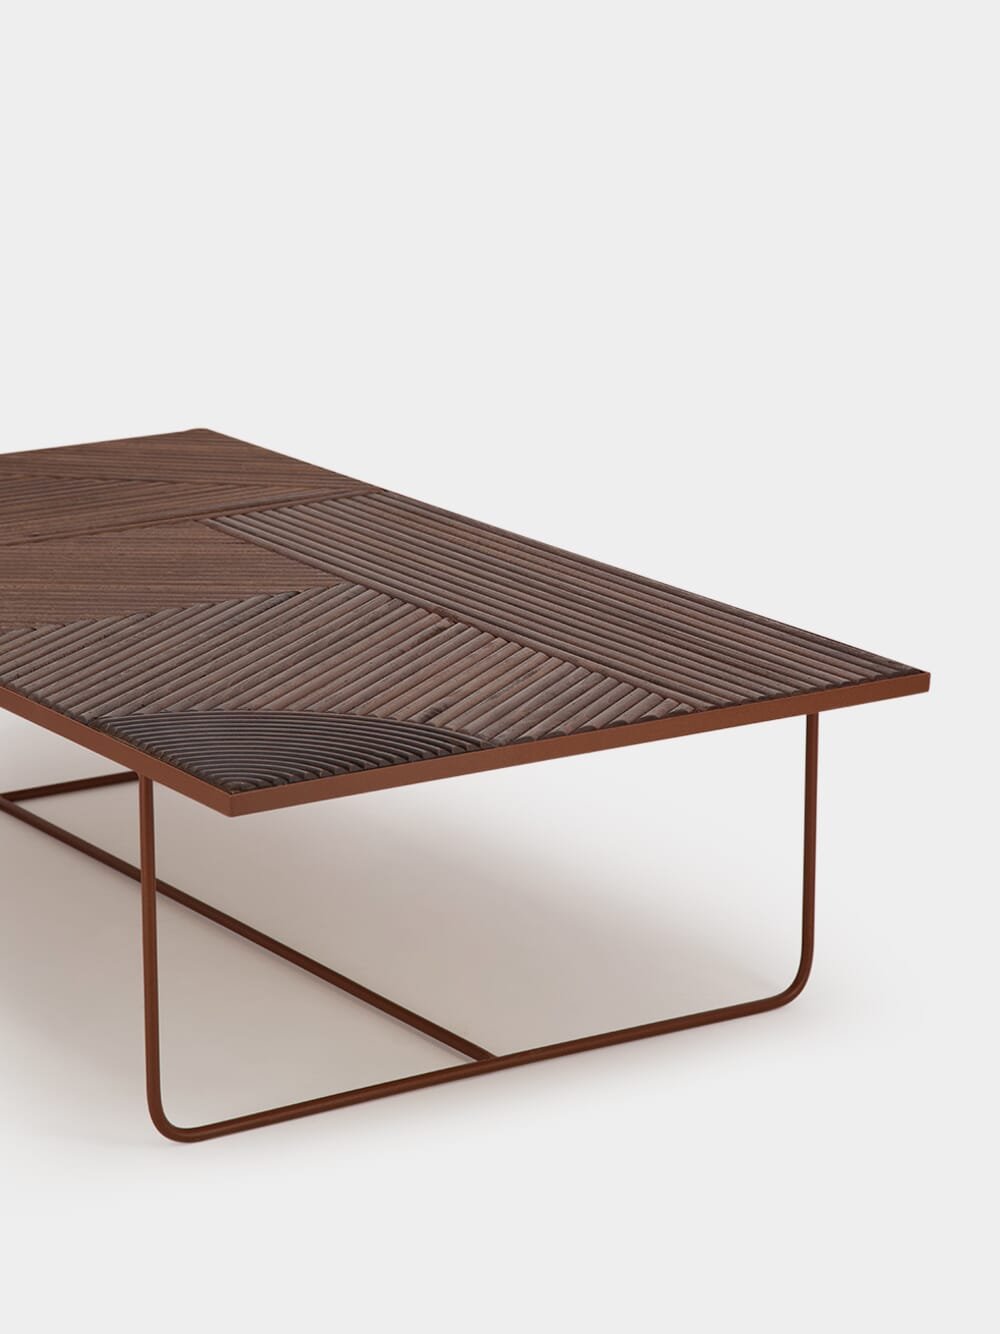 HonoréPaloma Brown Rectangular Coffee Table at Fashion Clinic